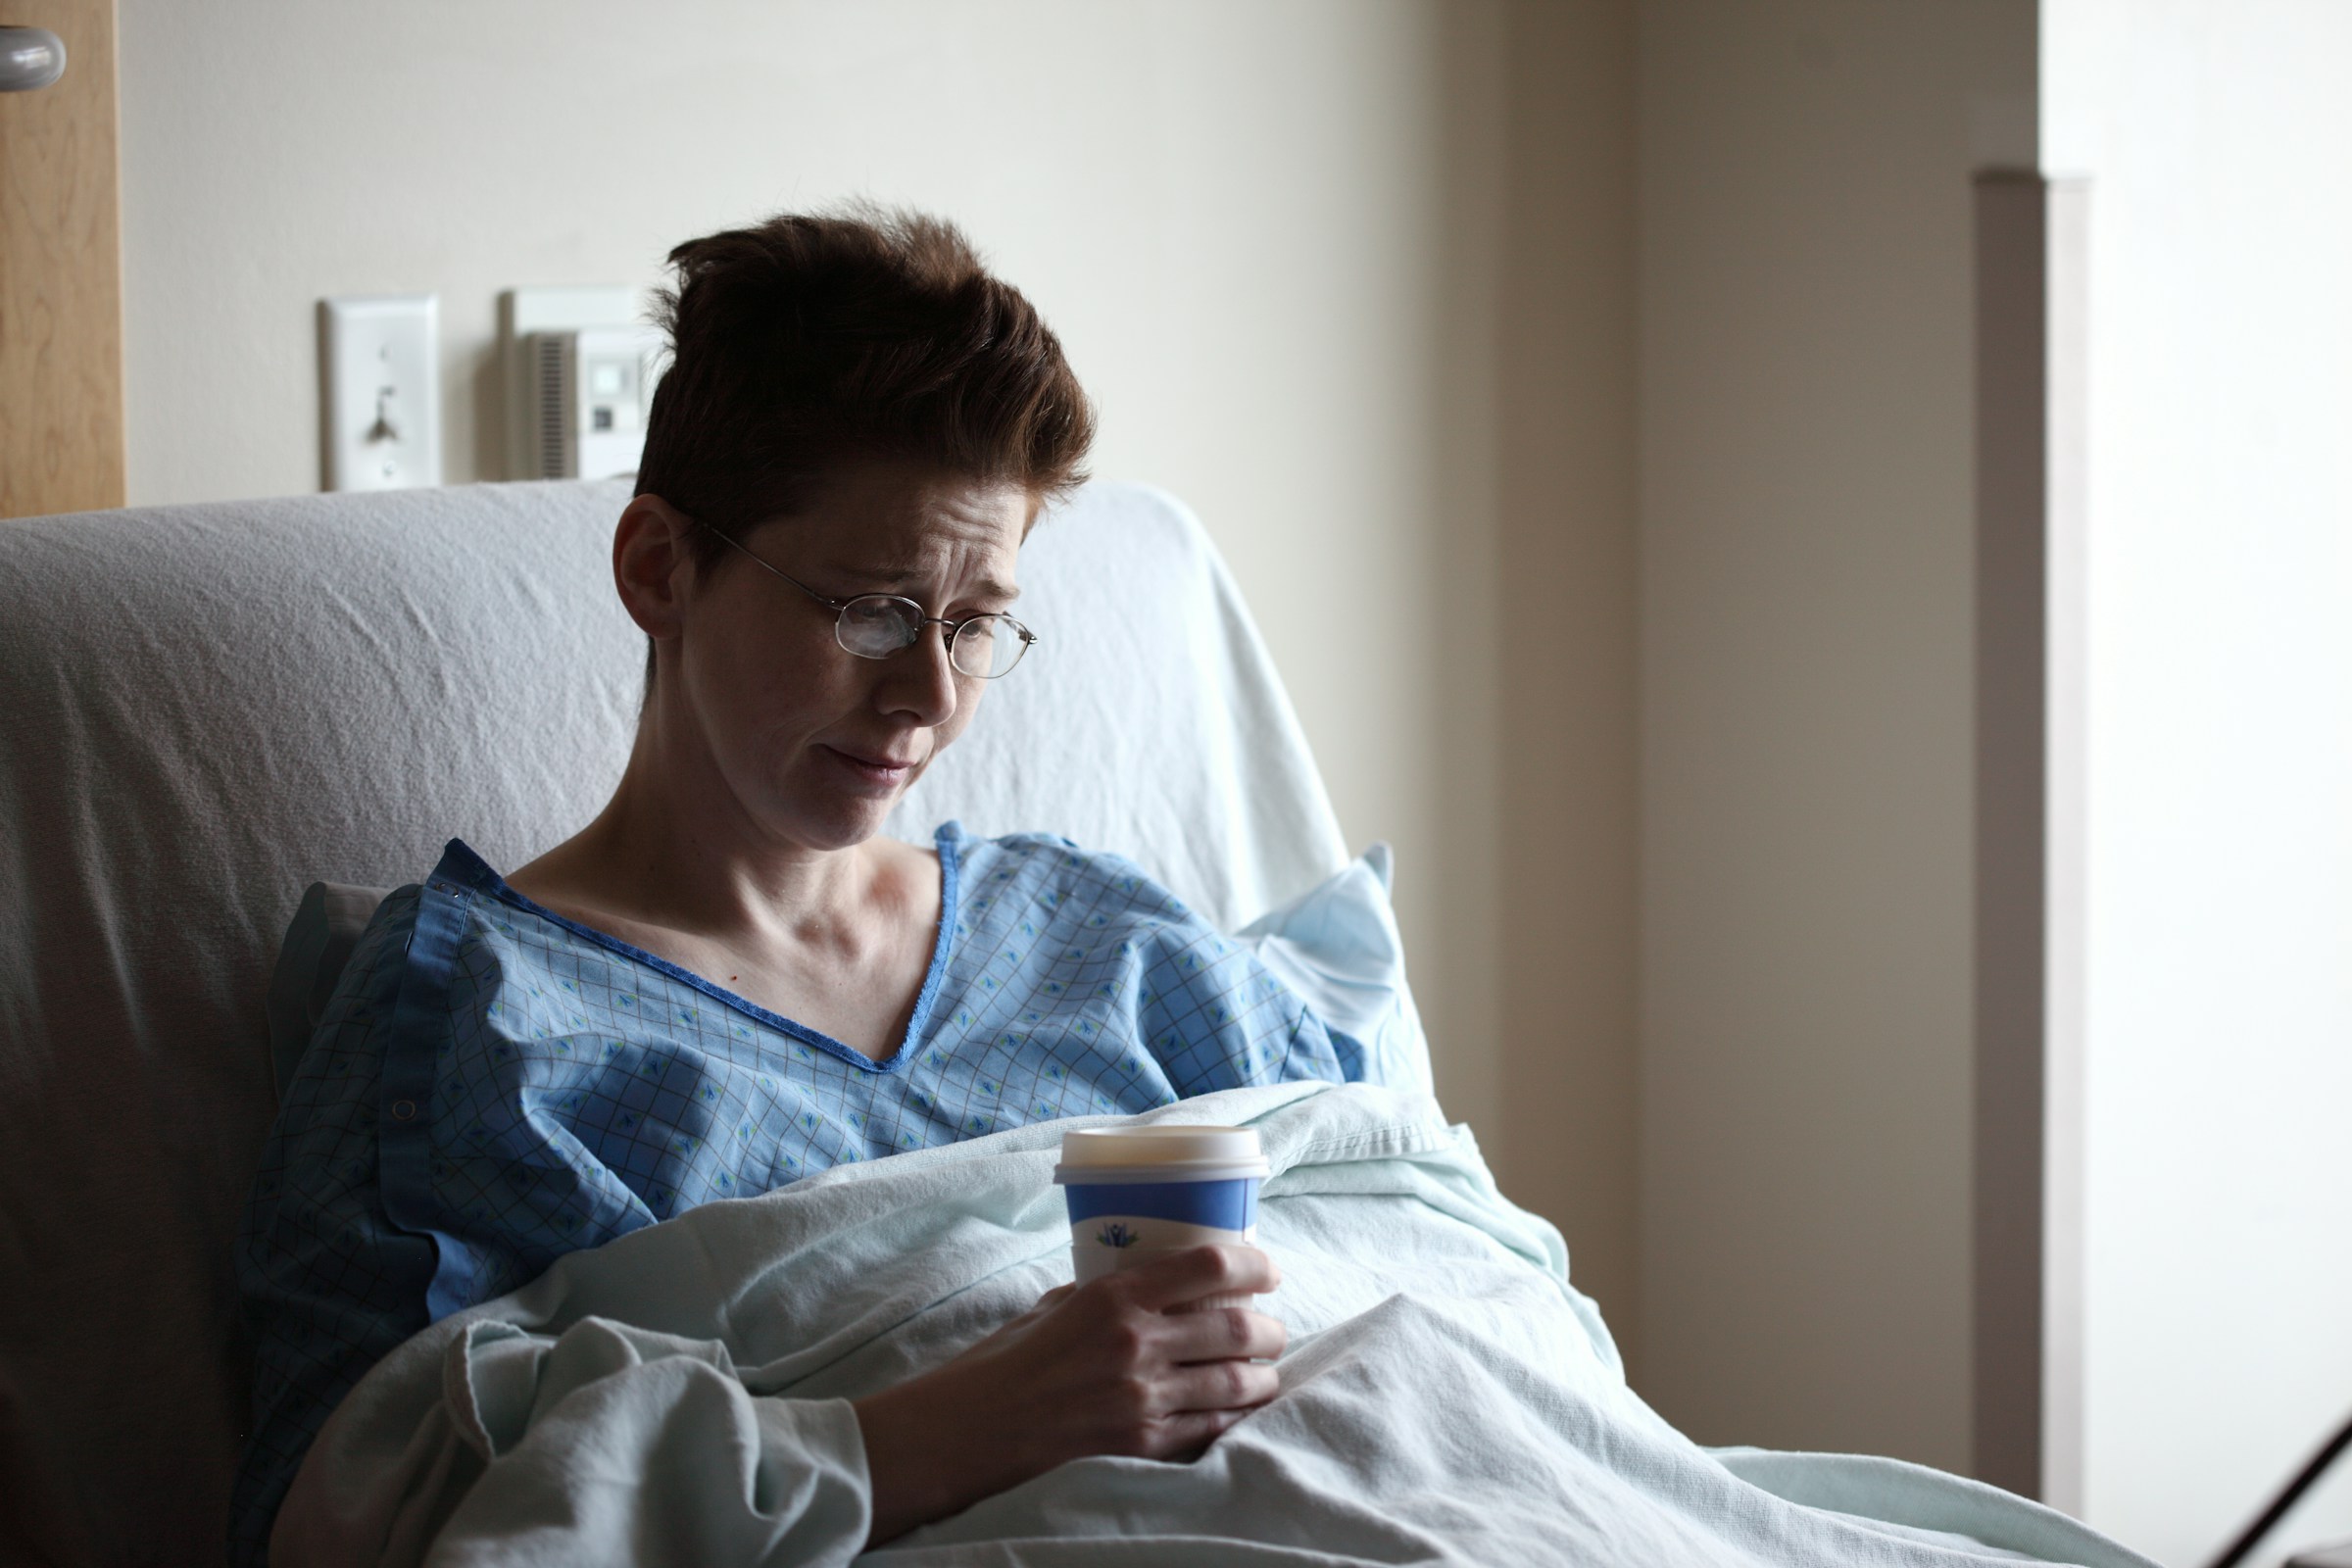 A woman in a hospital bed | Source: Unsplash